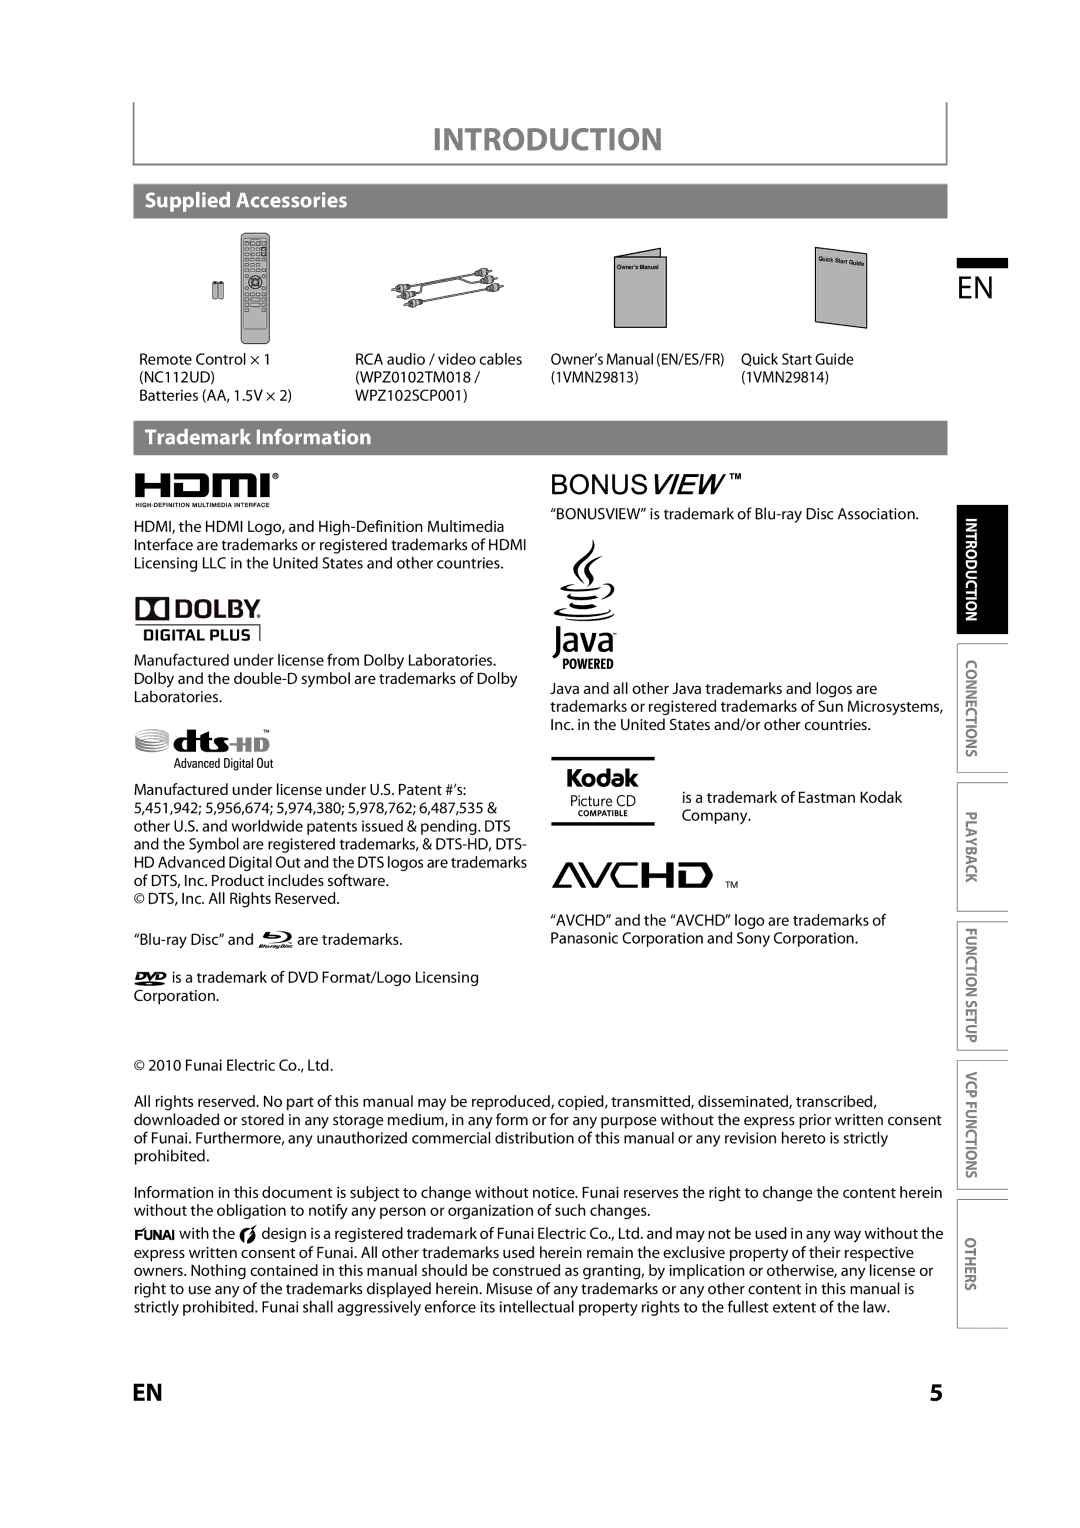 Magnavox MBP110V/F7 owner manual Supplied Accessories, Trademark Information, Remote Control × 